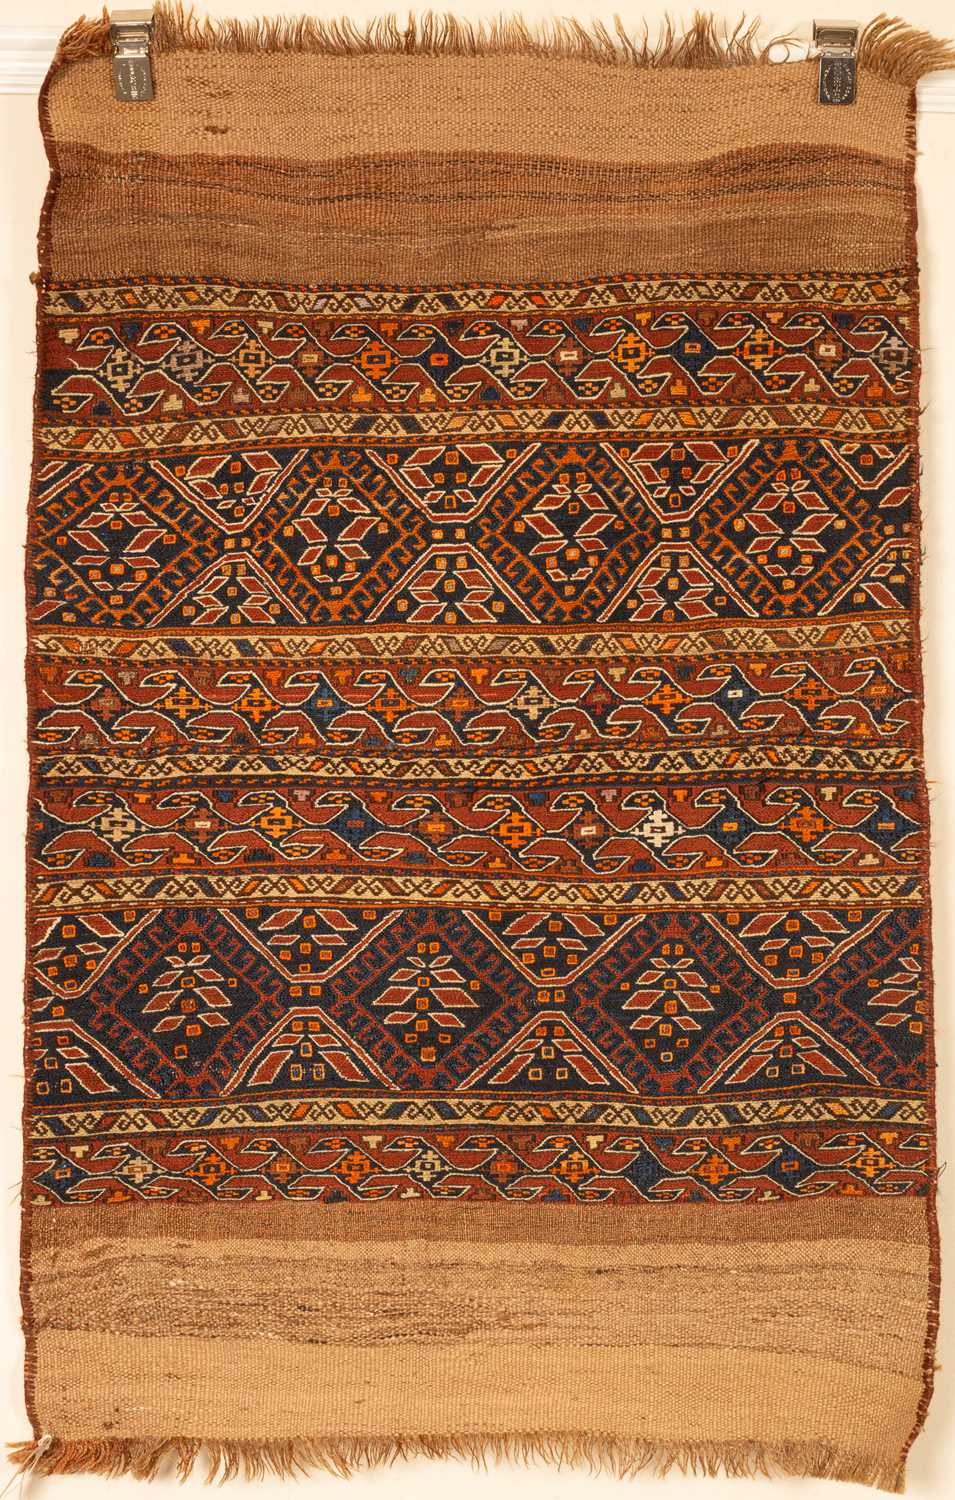 A Soumakh style rug or hanging